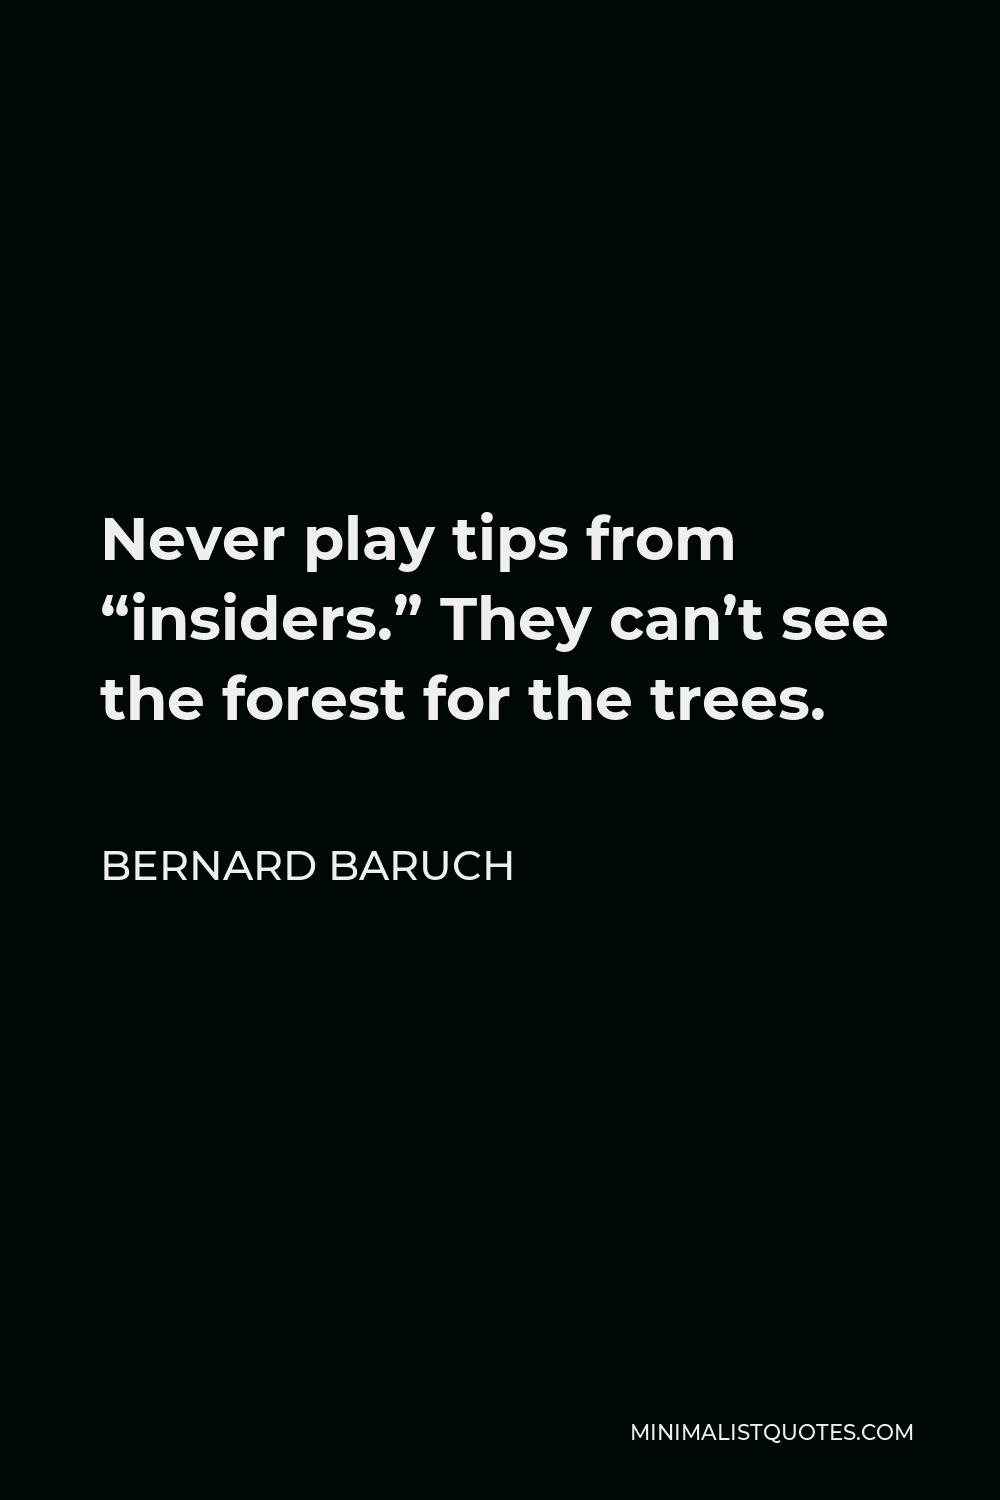 Bernard Baruch Quote - Never play tips from “insiders.” They can’t see the forest for the trees.